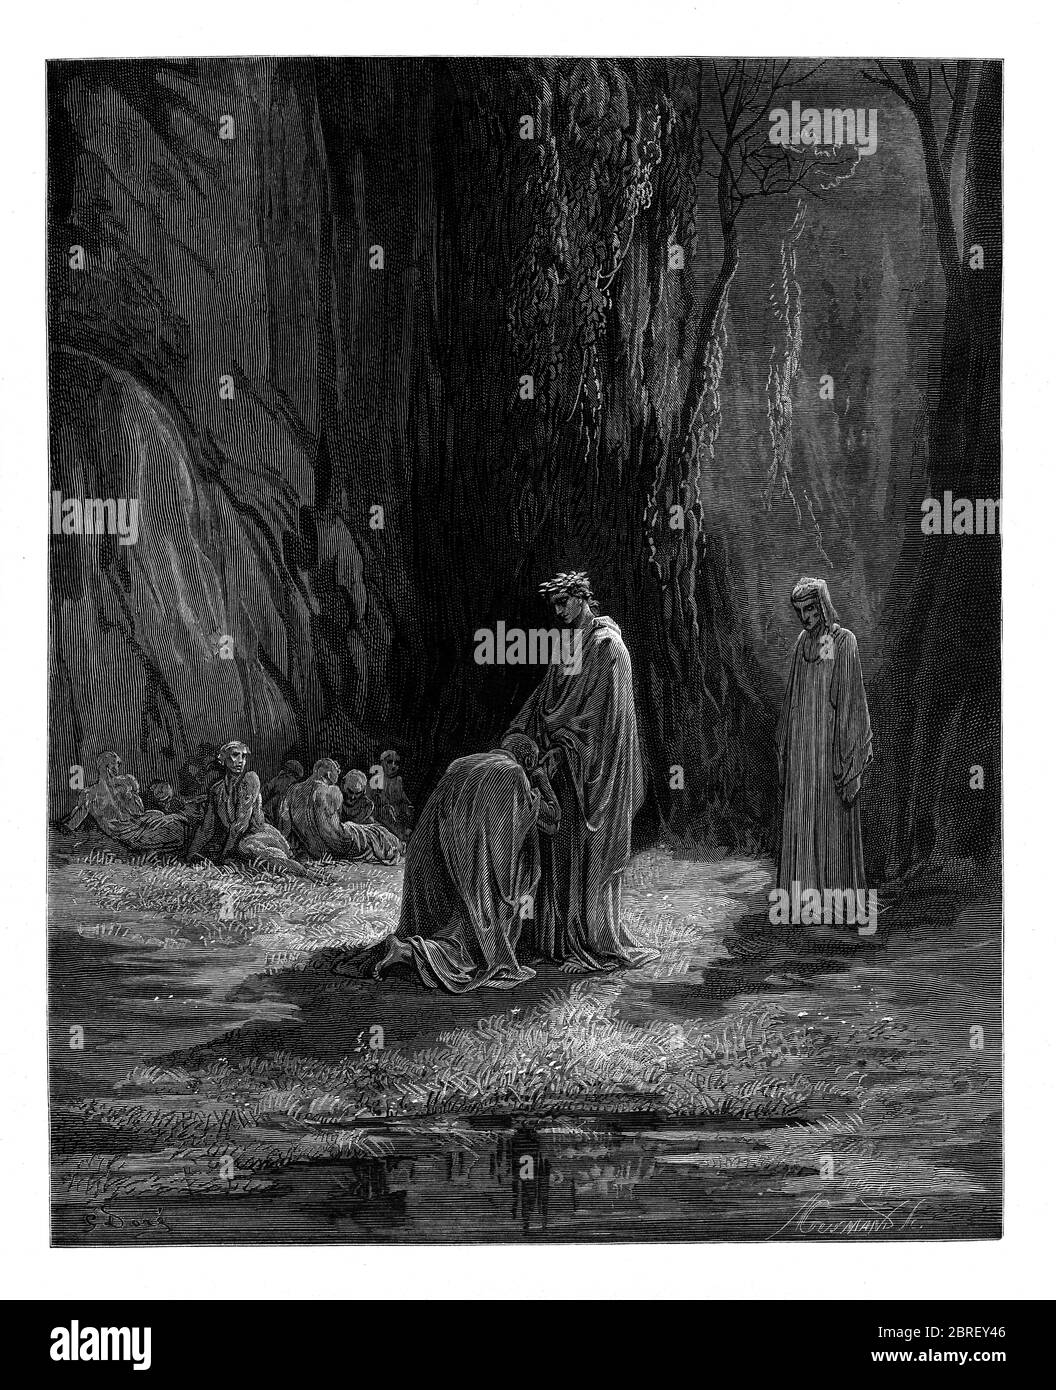 Dantes inferno illustration Cut Out Stock Images & Pictures - Alamy